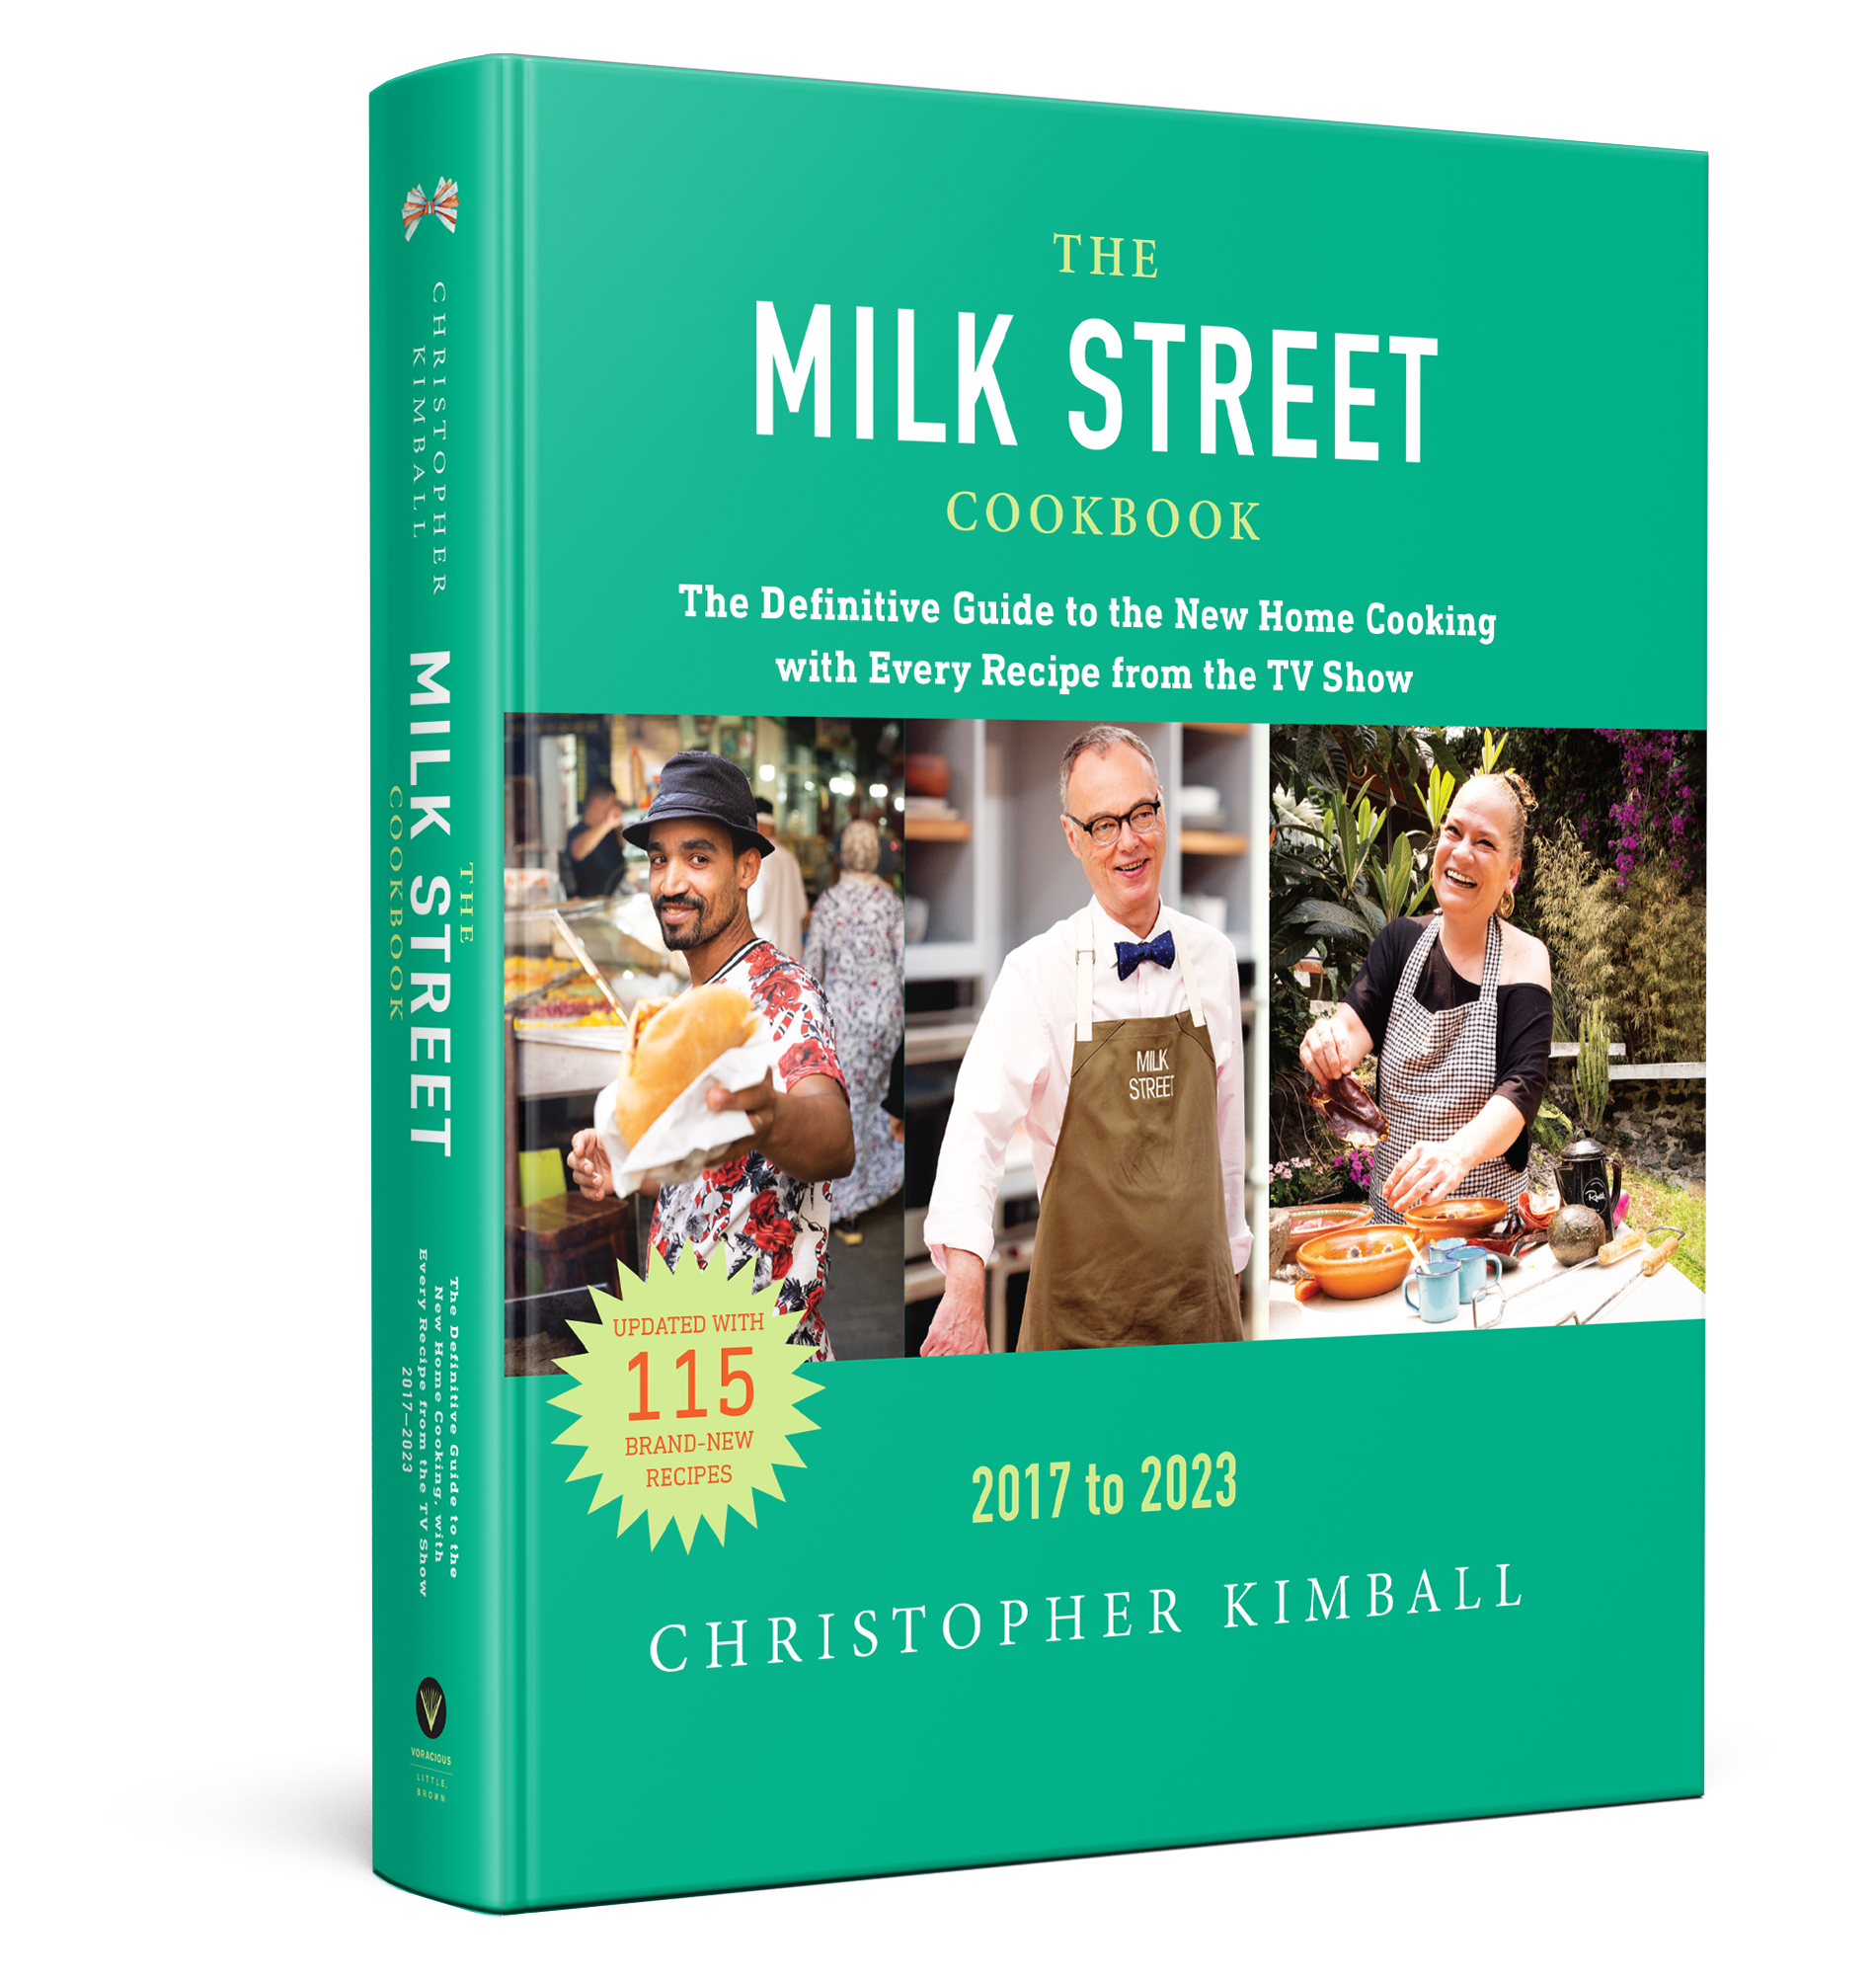 The Milk Street Cookbook: The Definitive Guide to the New Home Cooking, Featuring Every Recipe from Every Episode of the TV Show, 2017-2023 [Book]